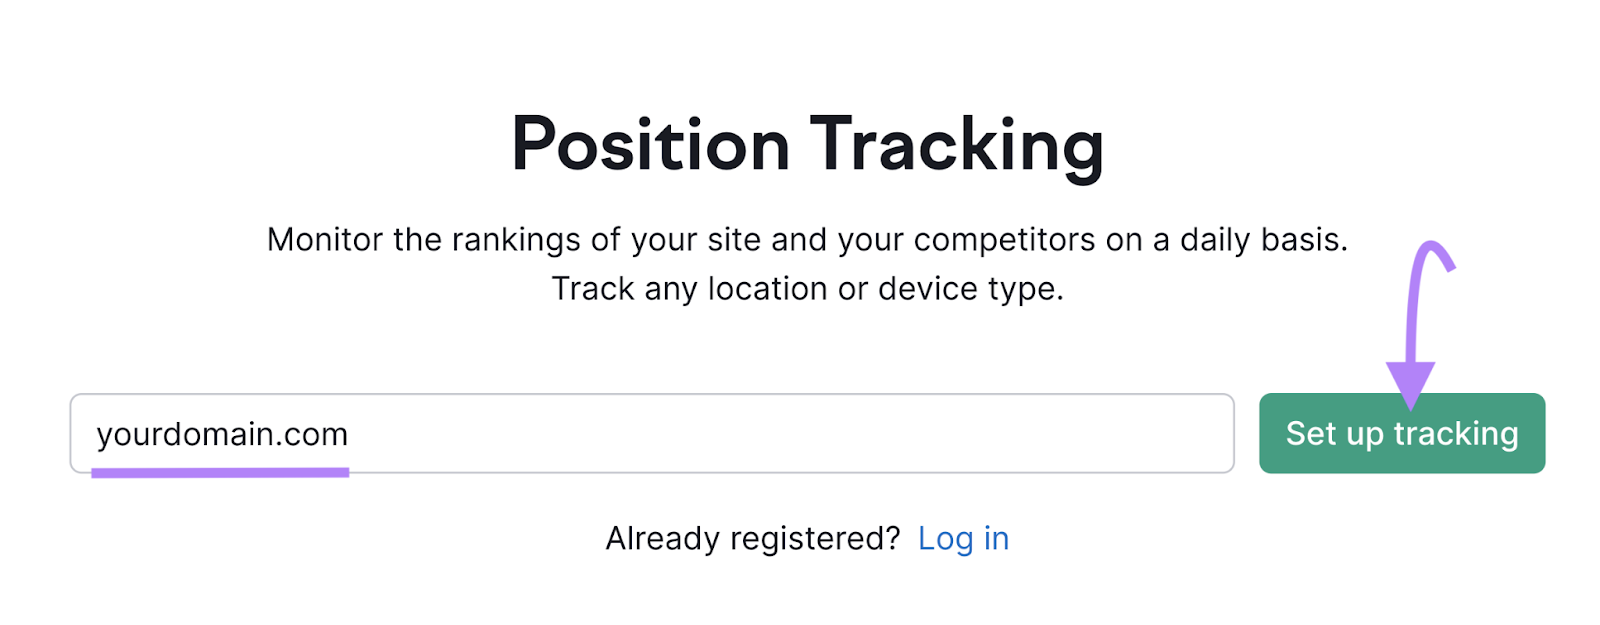 Position Tracking tool search for a domain